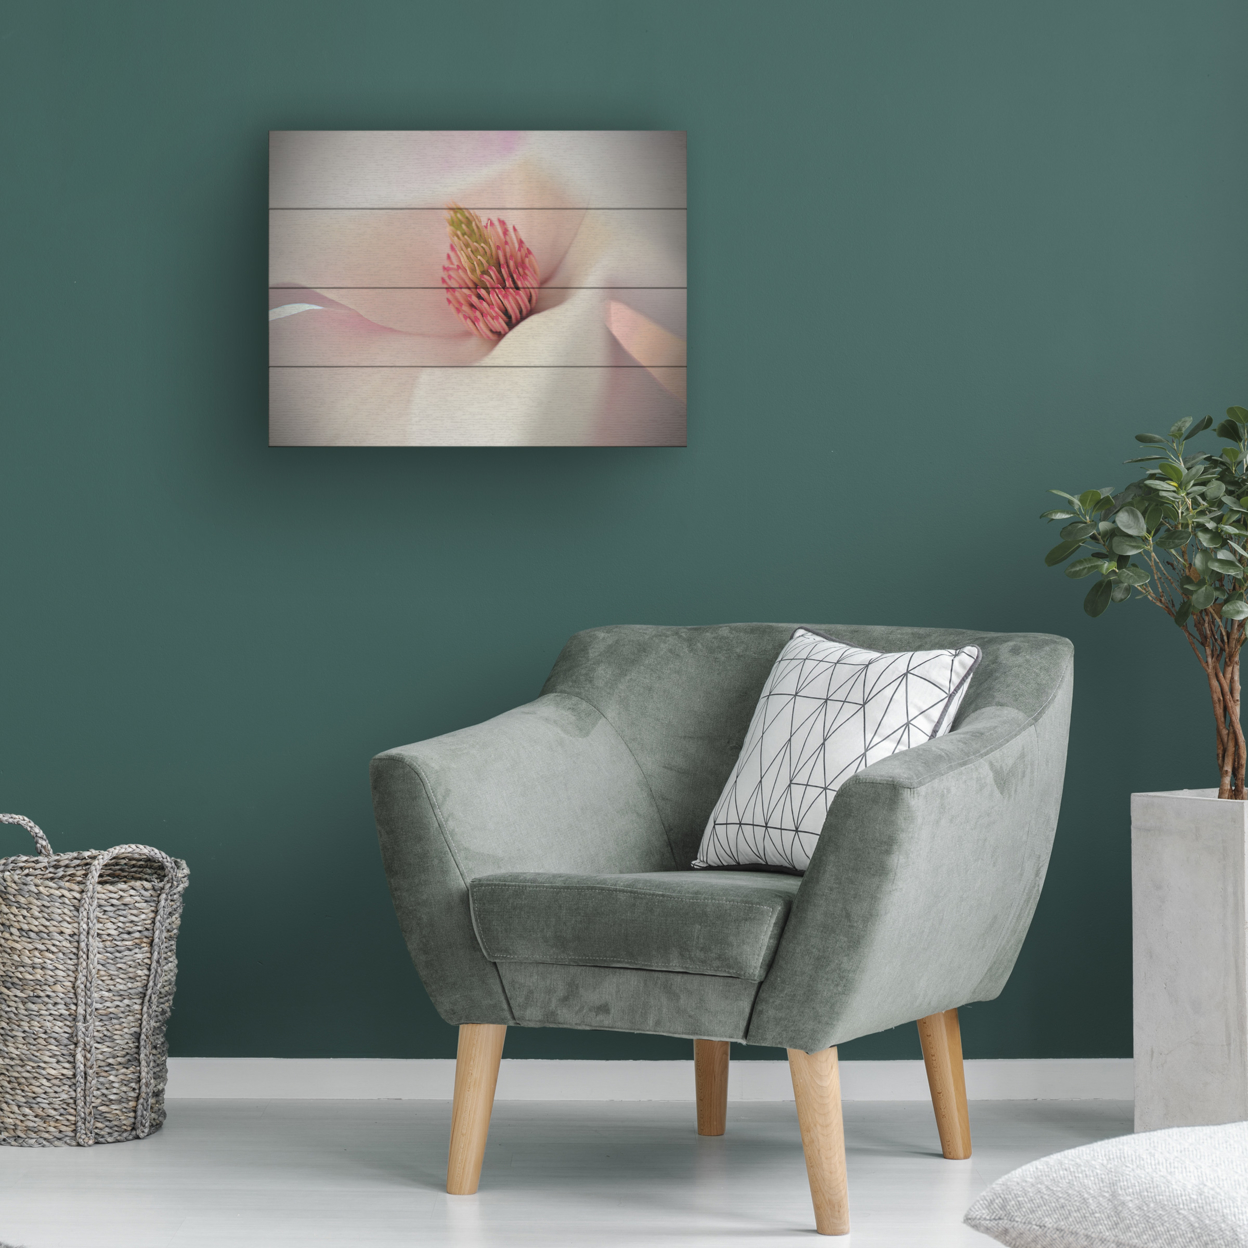 Wall Art 12 X 16 Inches Titled Heart Of Spring Ready To Hang Printed On Wooden Planks